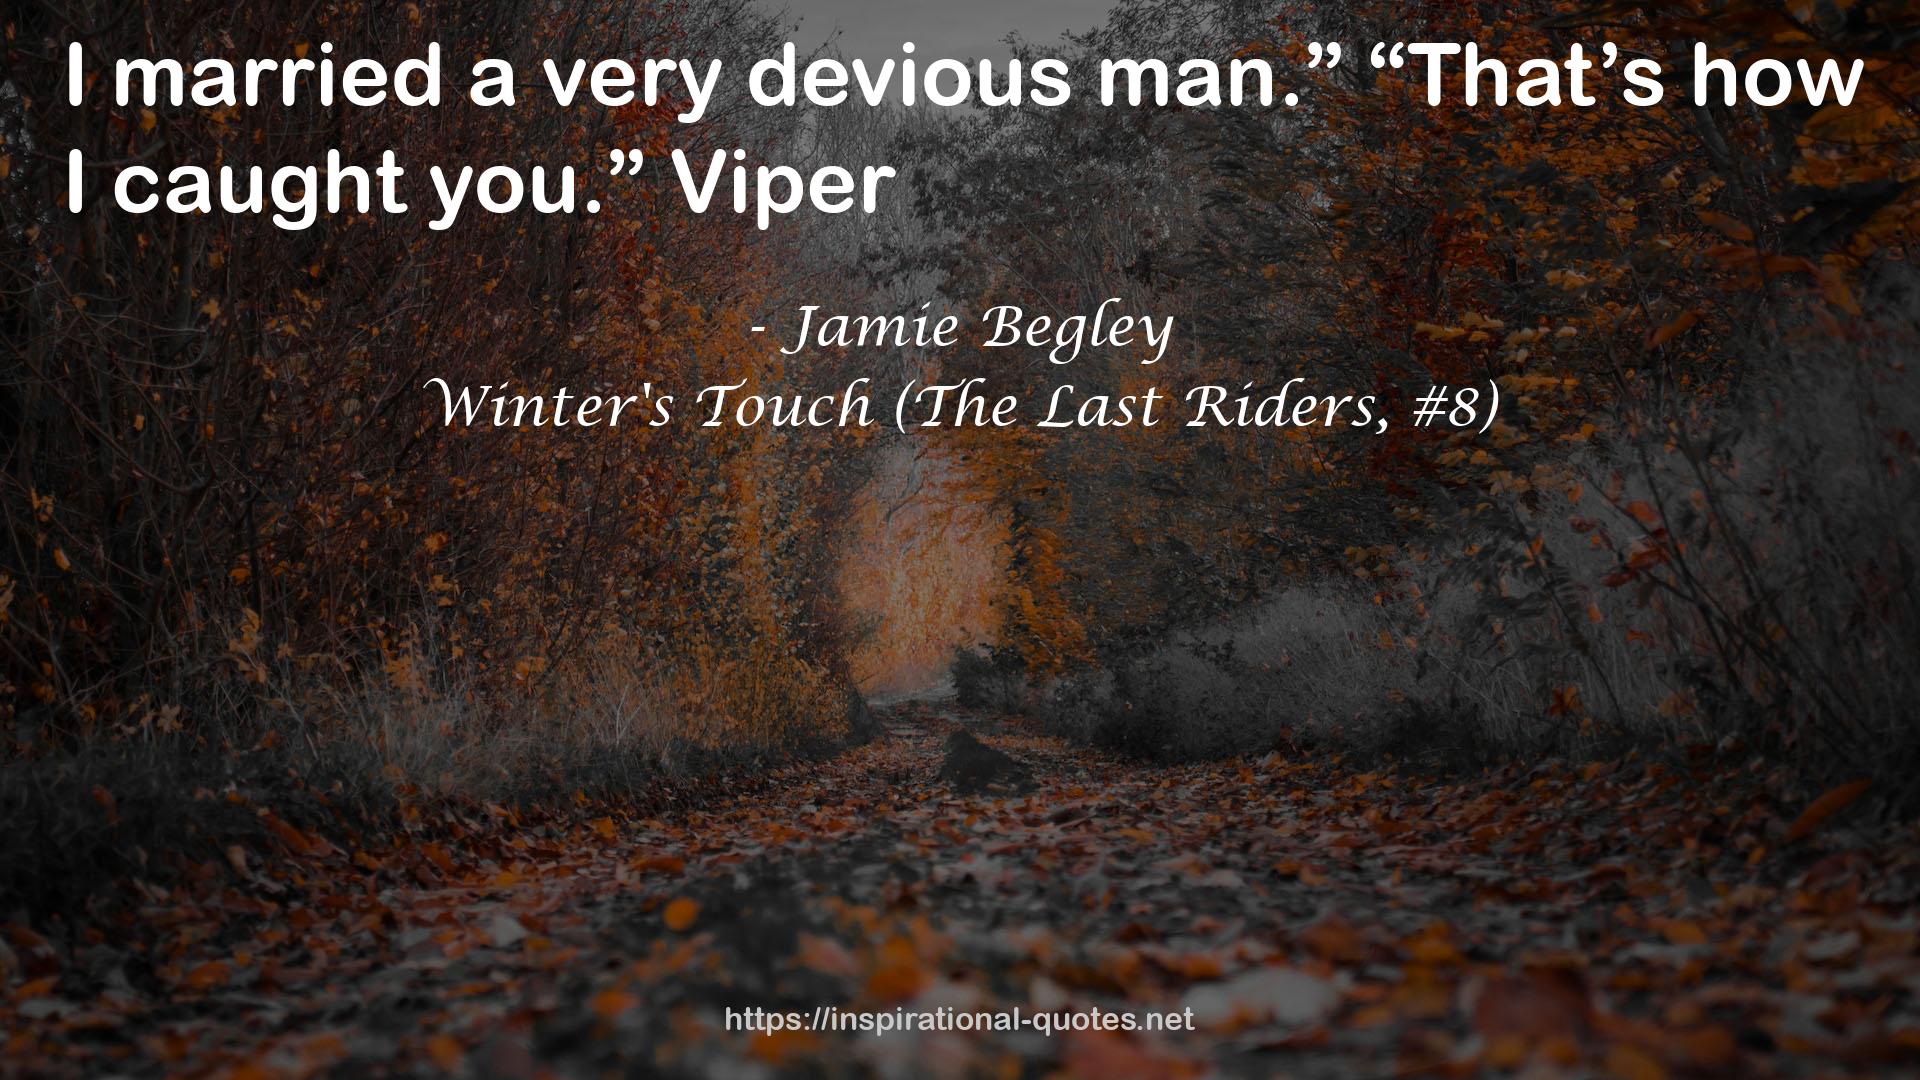 Winter's Touch (The Last Riders, #8) QUOTES